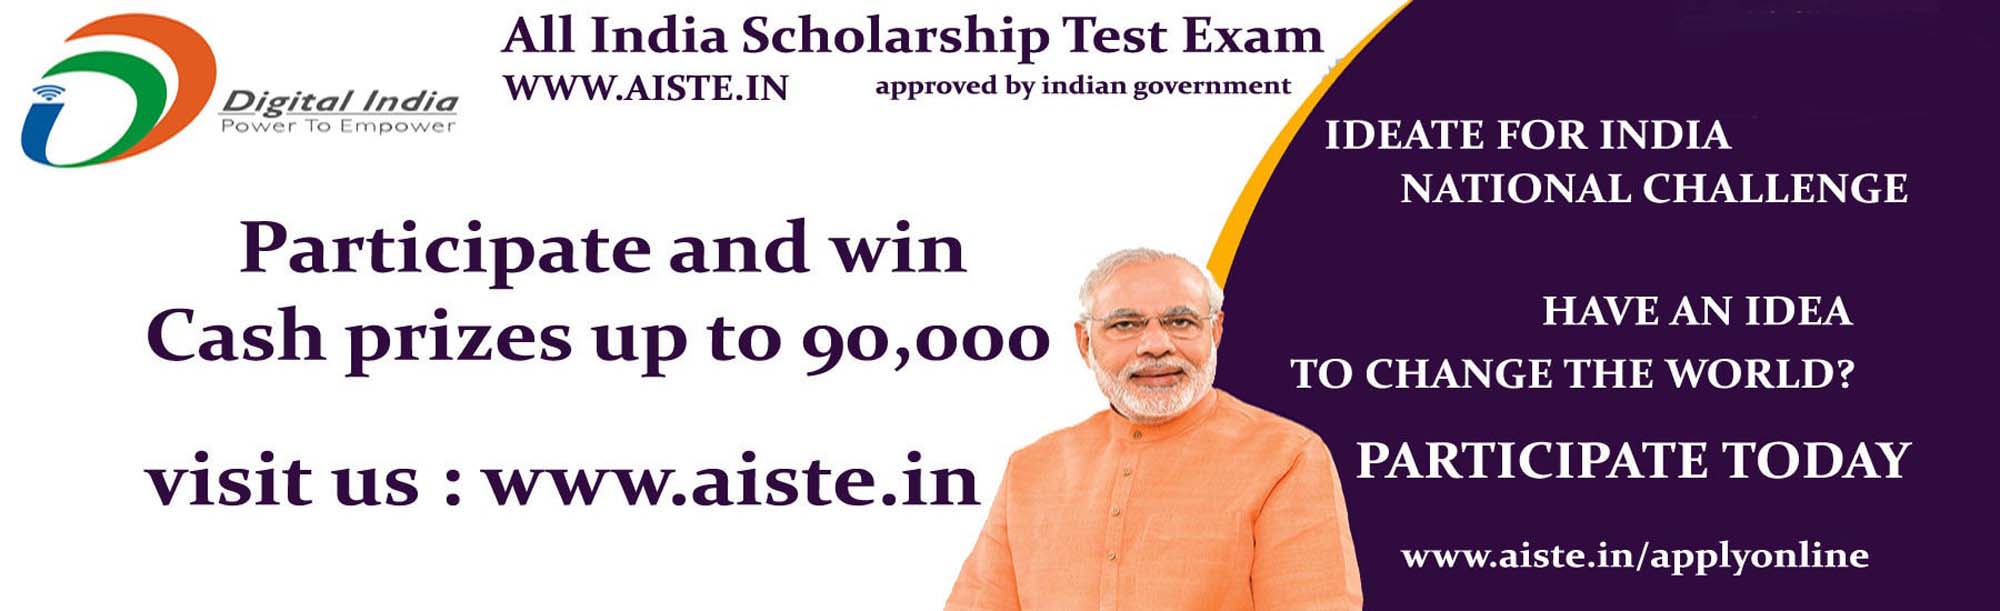 PARTICIPATE TODAY SCHOLARSHIP